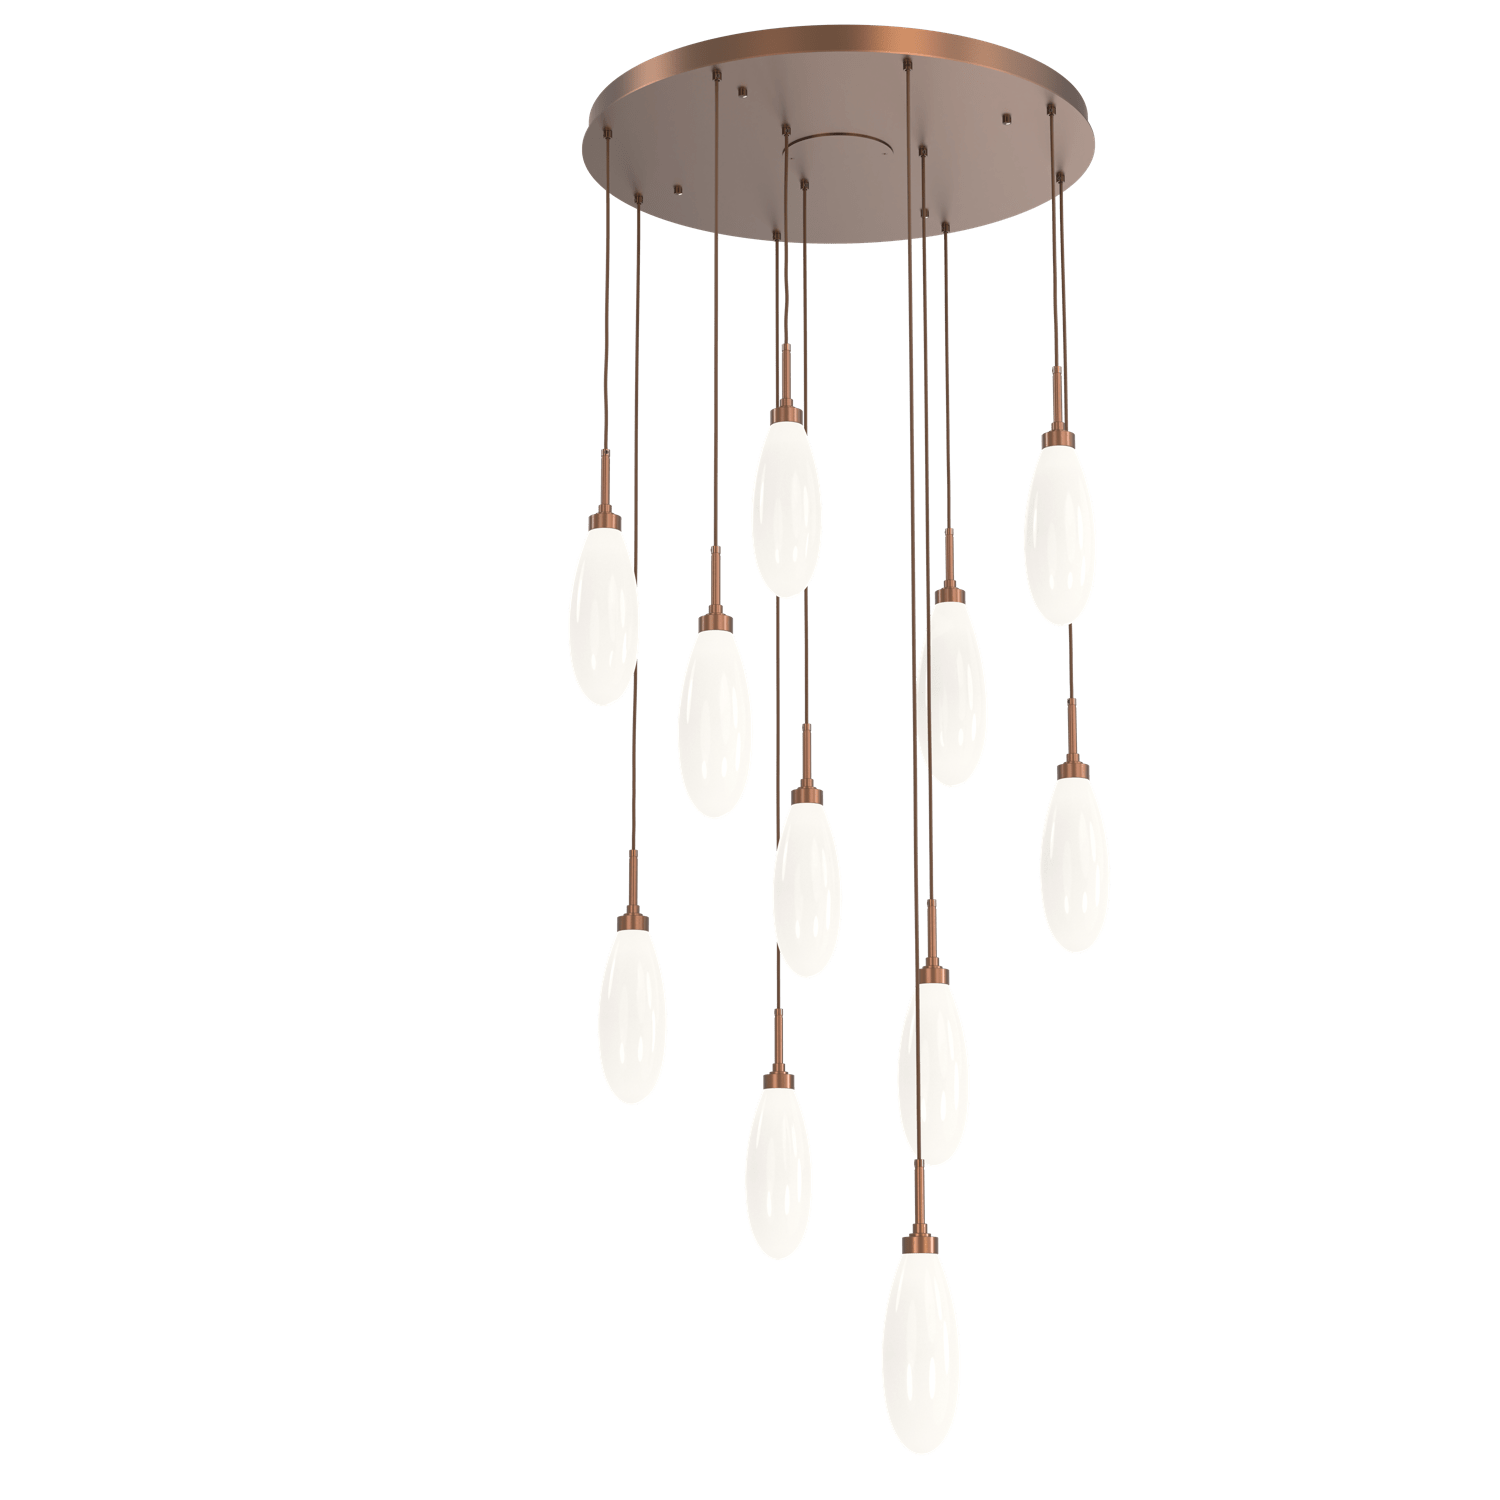 CHB0071-11-BB-WL-LL-Hammerton-Studio-Fiori-11-light-round-pendant-chandelier-with-burnished-bronze-finish-and-opal-white-glass-shades-and-LED-lamping